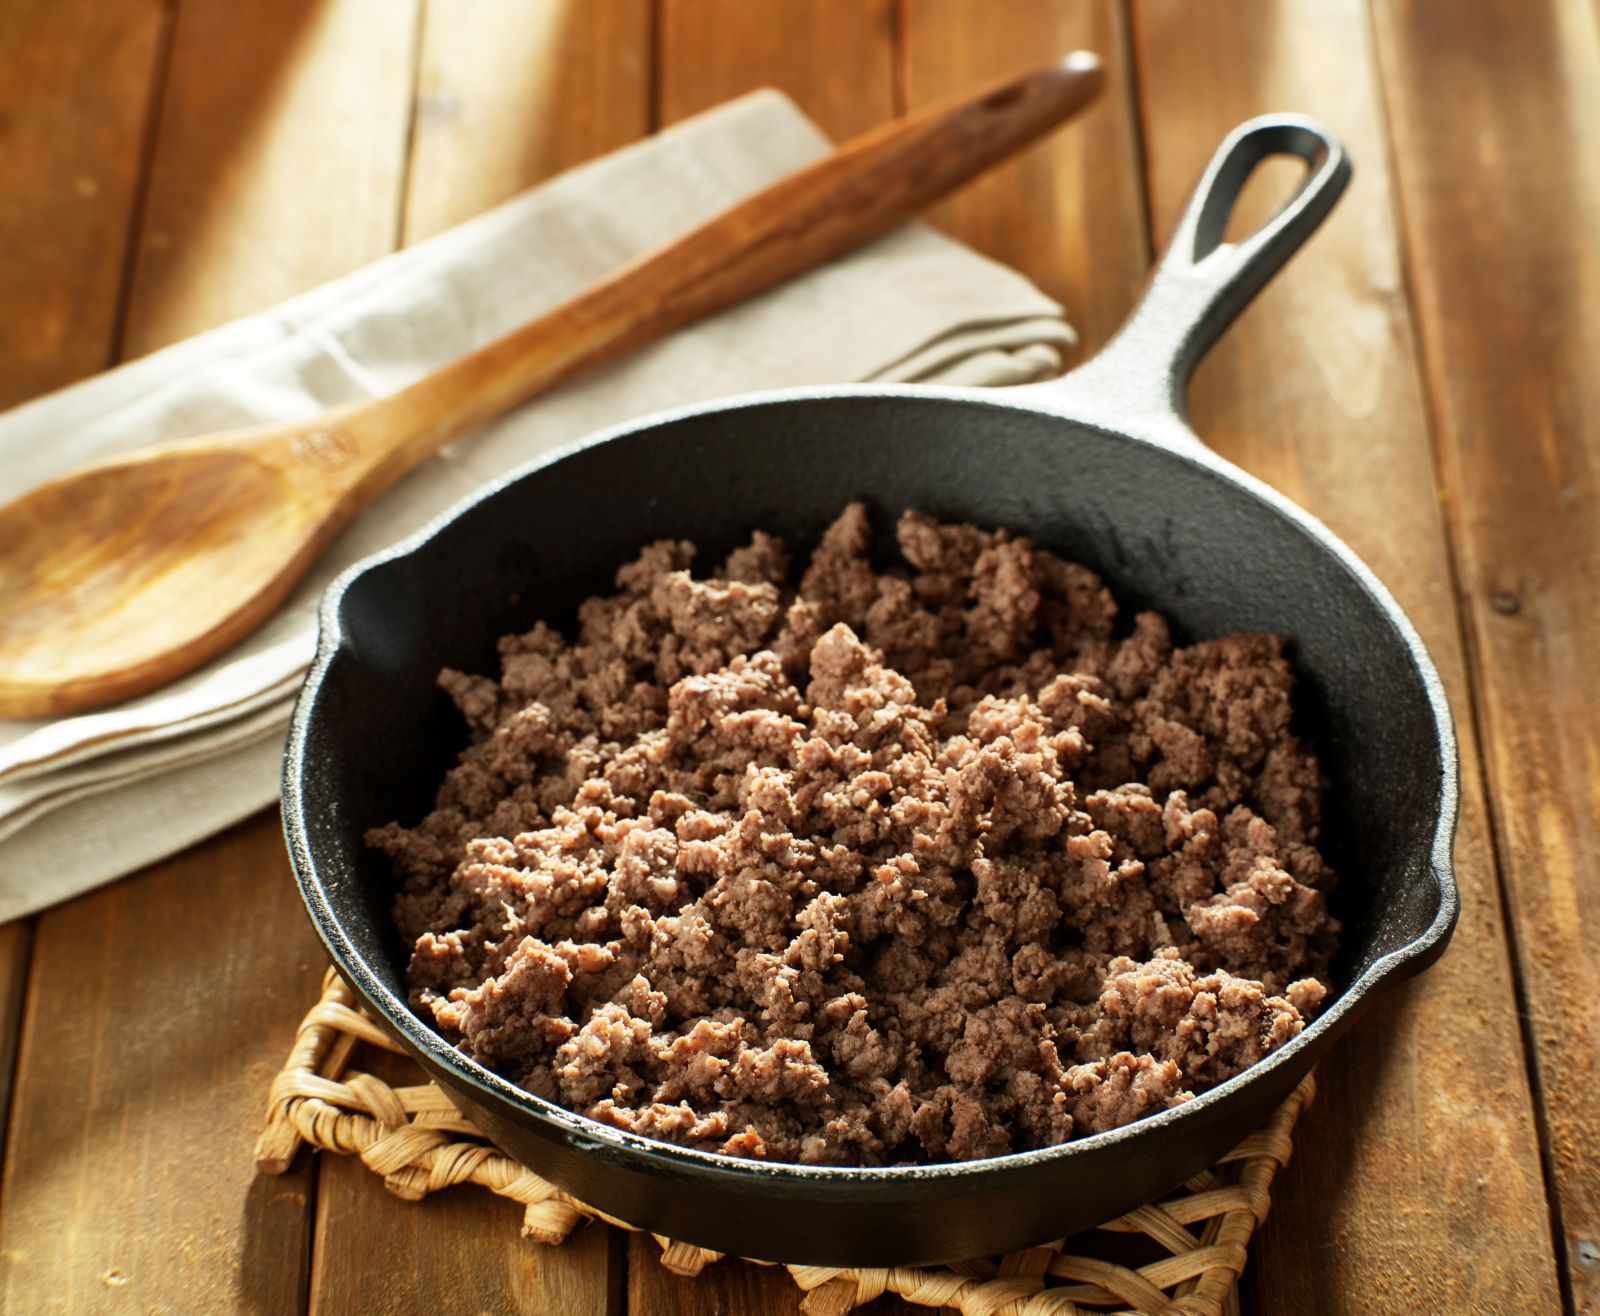 Which is Better for Cooking Ground Beef?